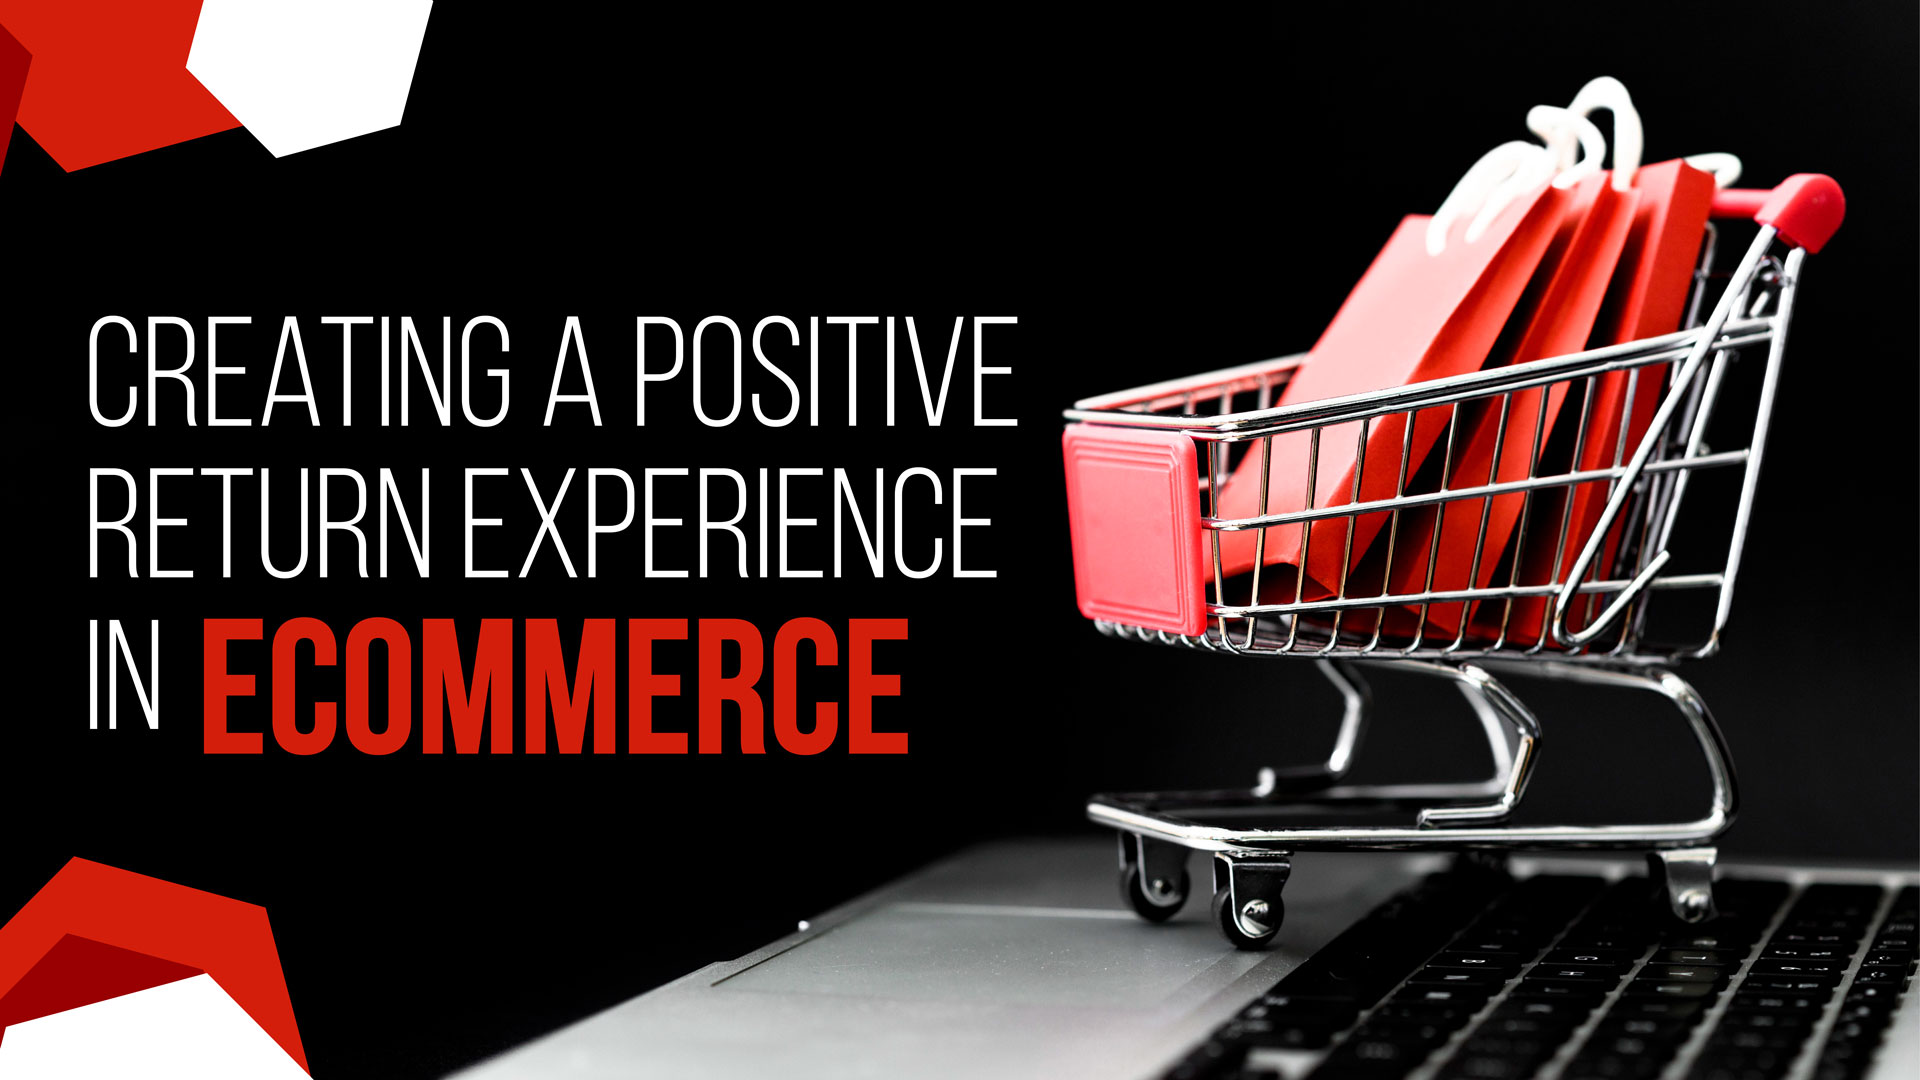 A Retail POS System Software for Creating a positive return experience in eCommerce